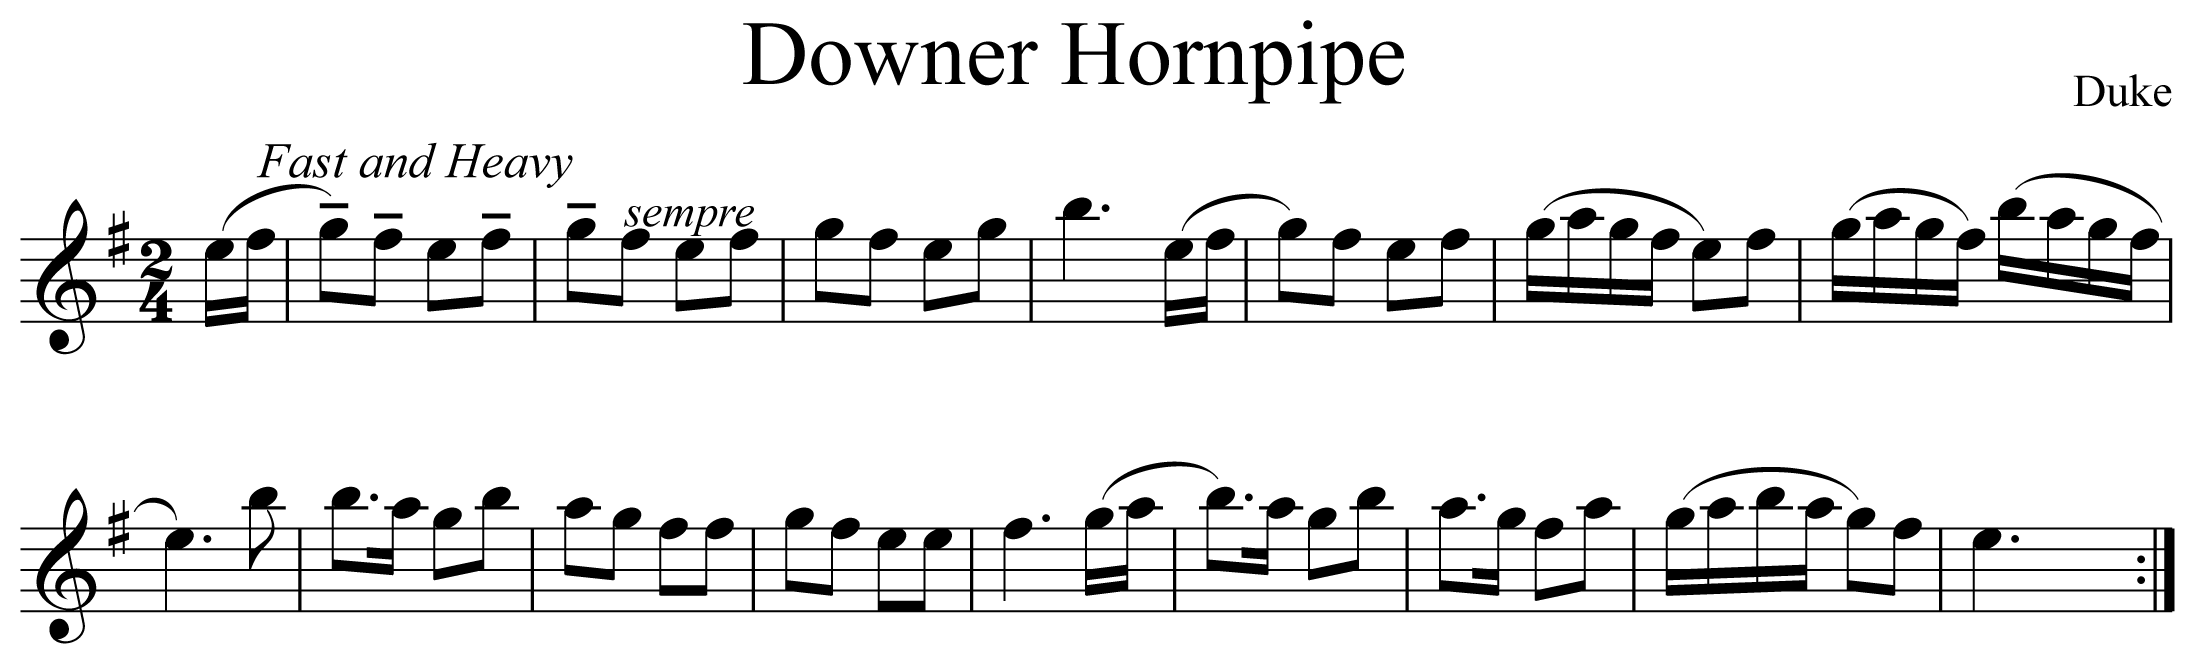 Downer Hornpipe Notation Clarinet